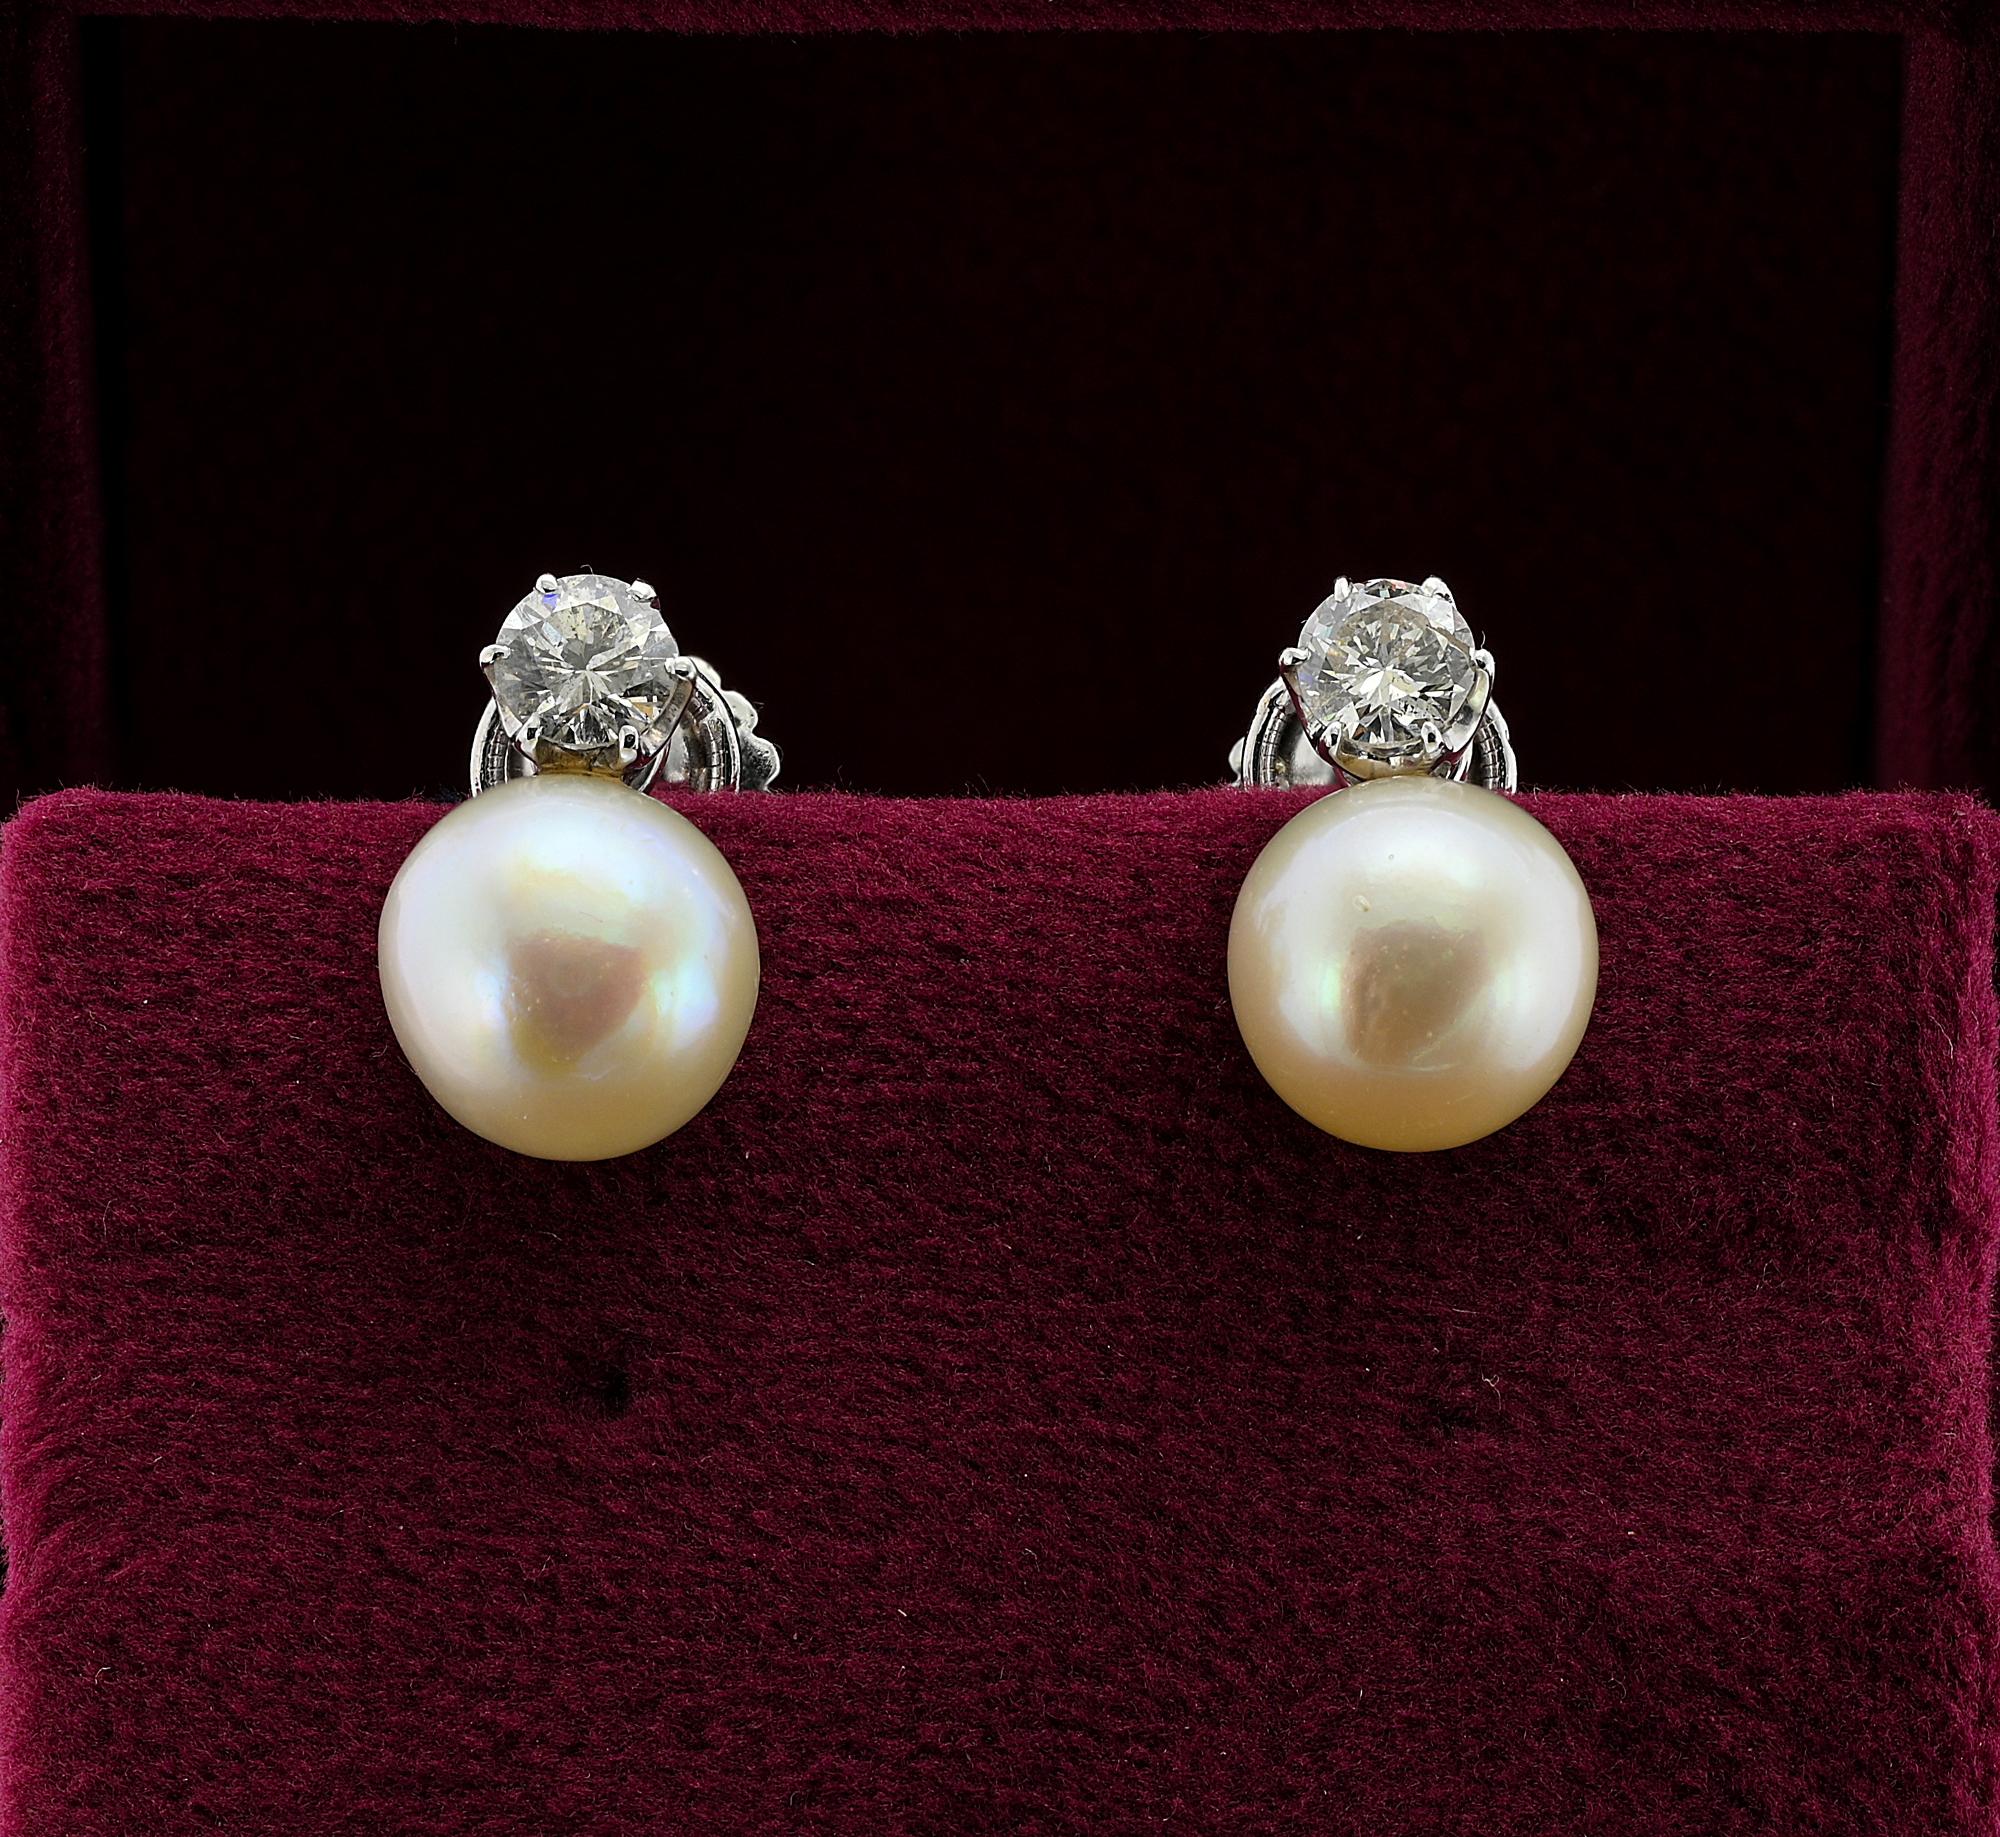 These beautiful vintage pair of earrings are 1930 circa
Traditional solitaire Pearl setting topped by a single Diamond making one of the most beloved design to wear all the time
Hand crafted of solid 18 KT white gold with a screw back fitting